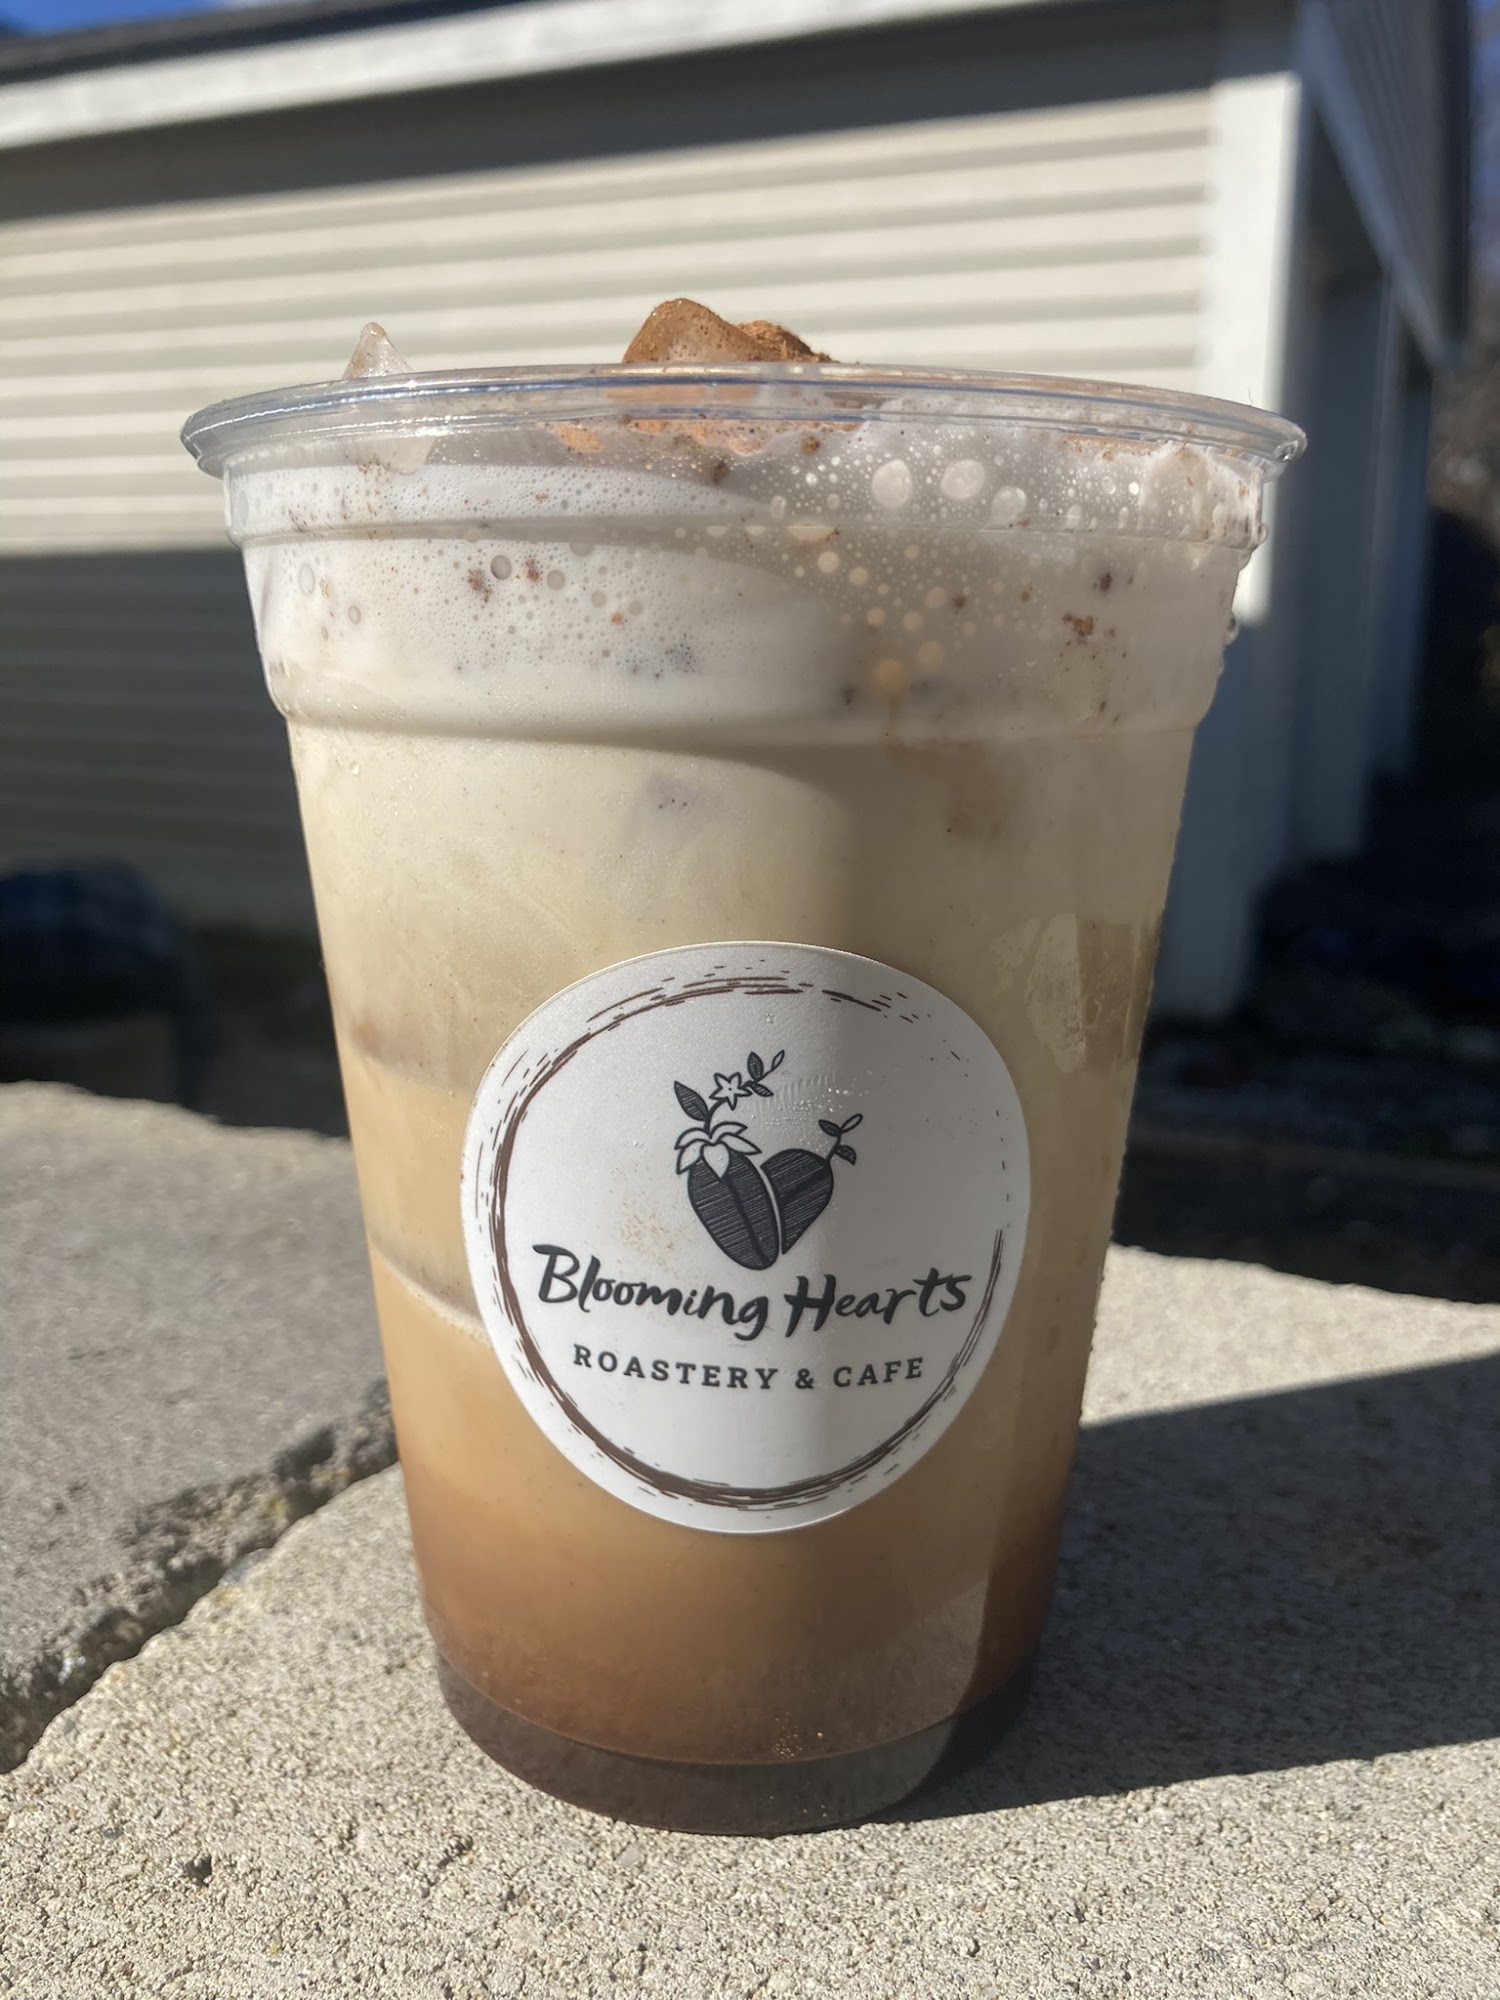 Blooming Hearts Roastery & Cafe